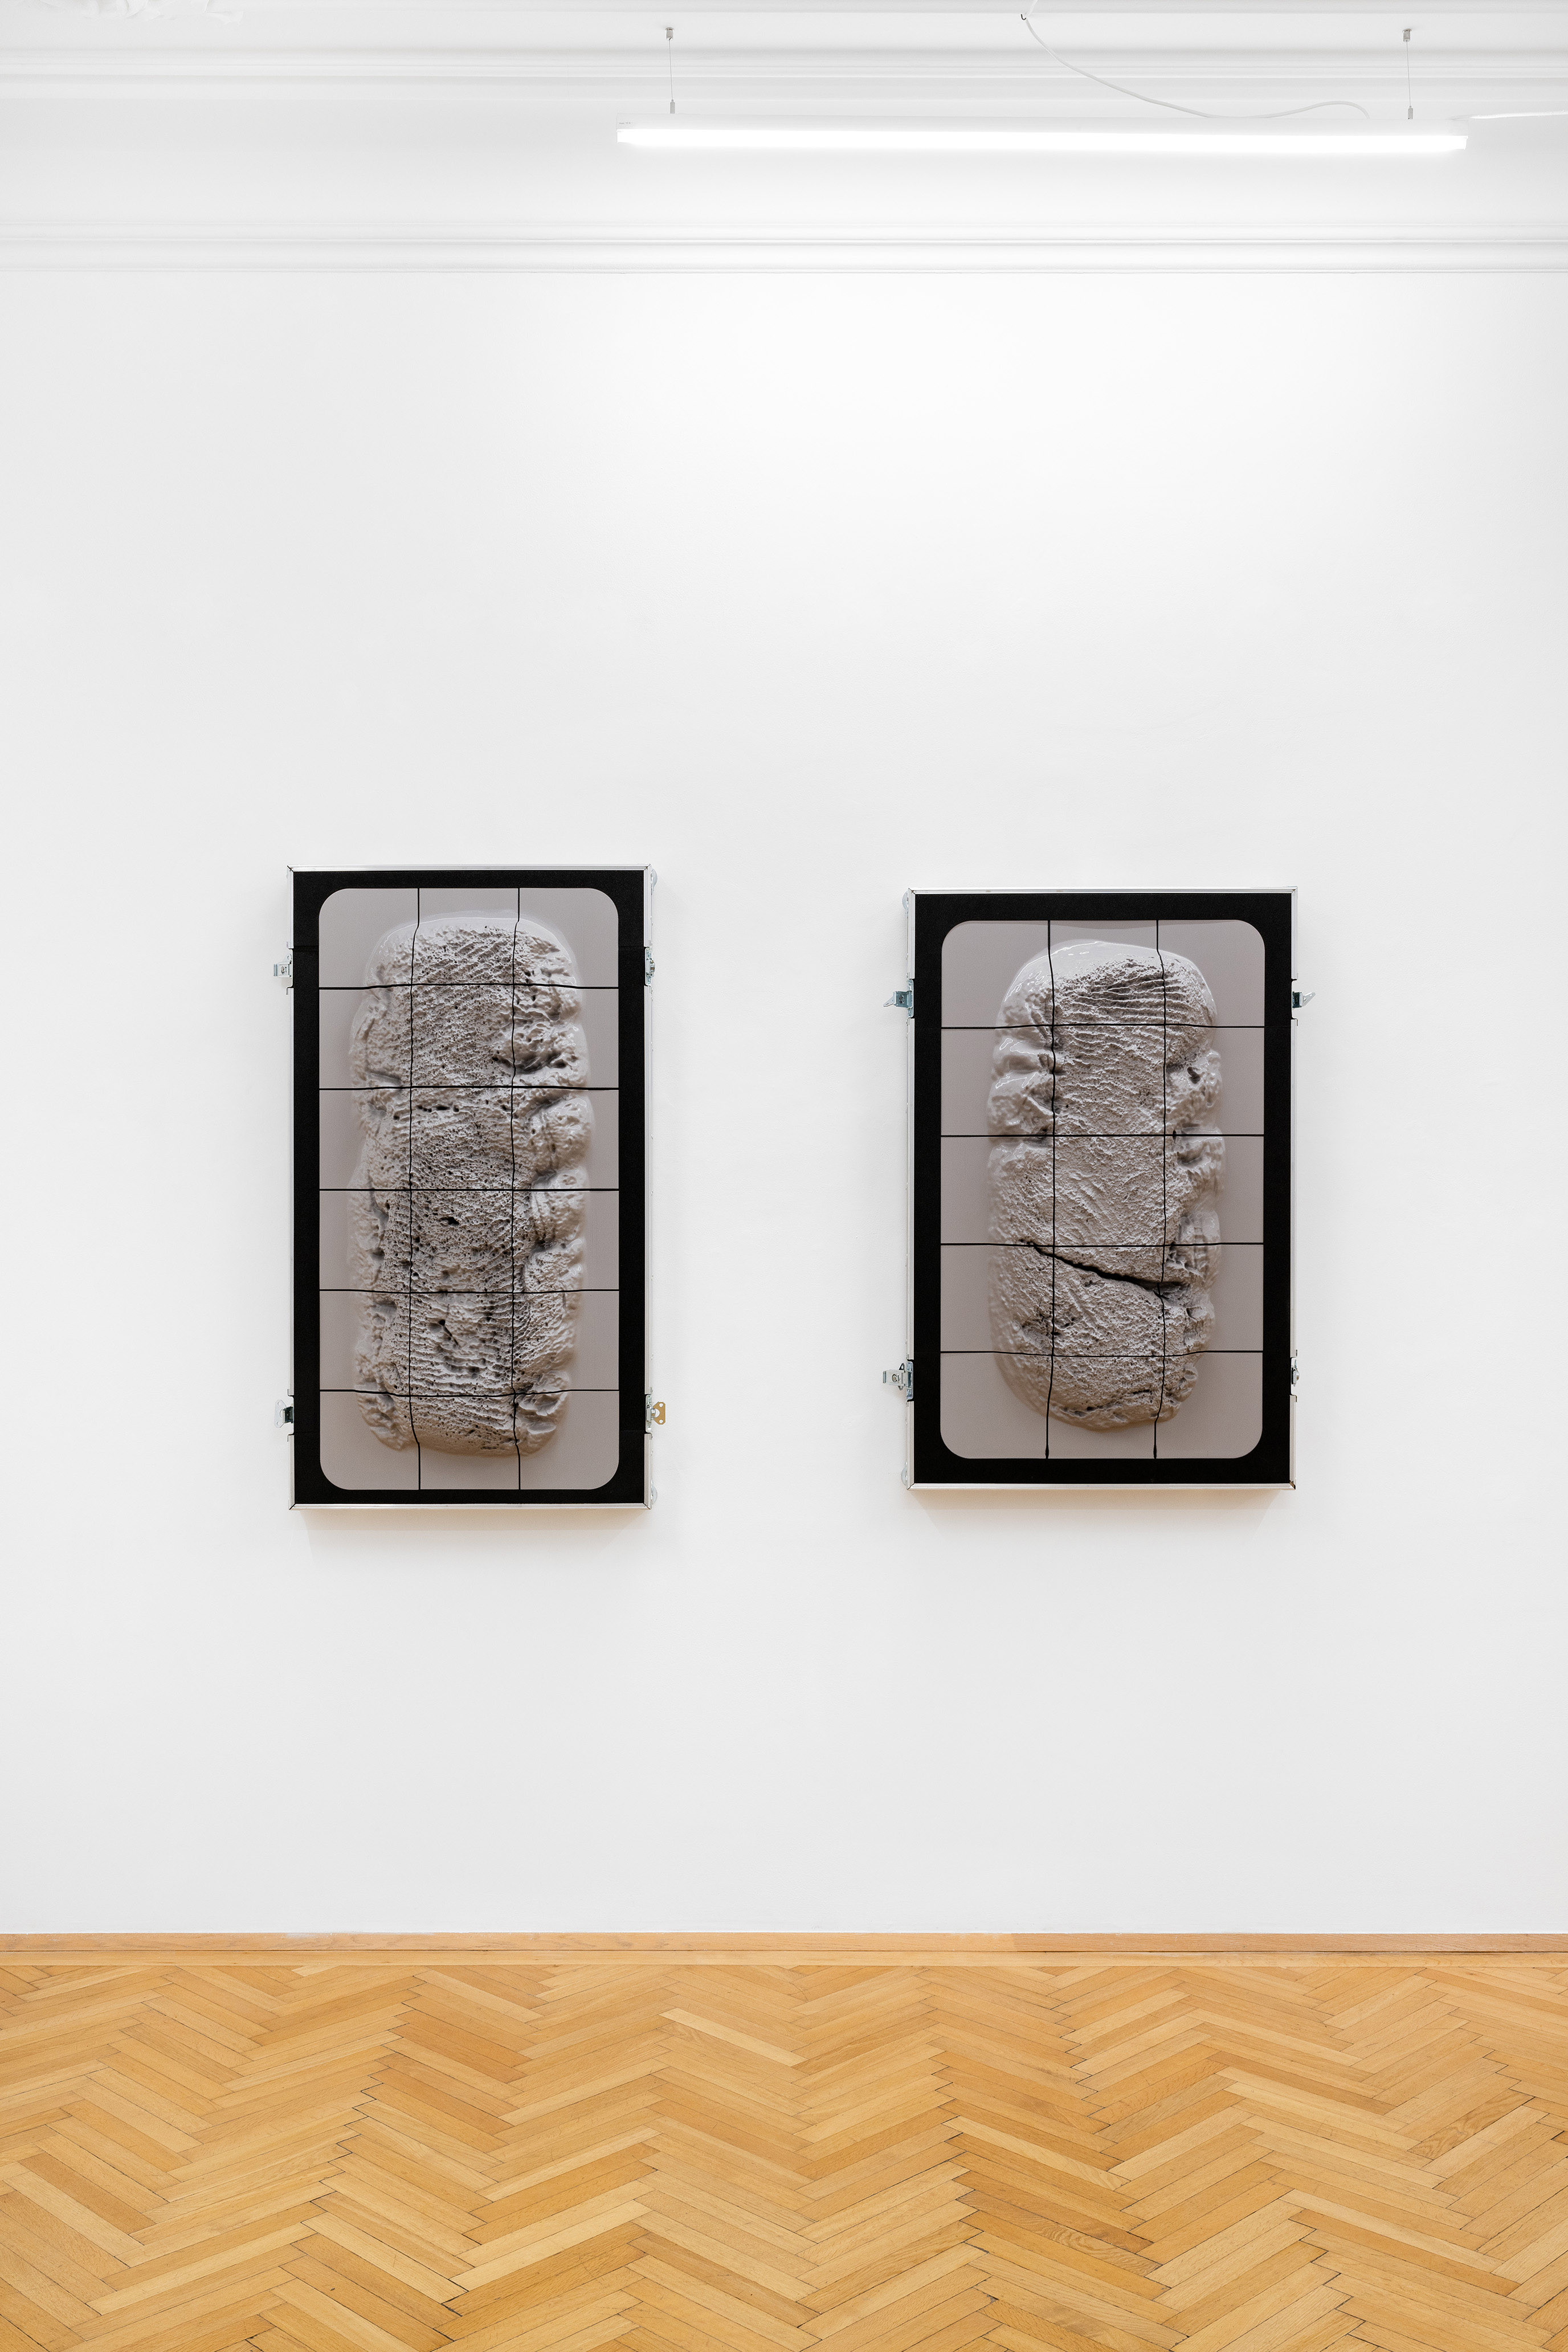 Sami Mandee: Untitled (Belly), 2023, PETG print of a heightmap of a delivery note, screen printing plate, aluminum, PE foam (both), 128 x 68 x 50 cm; Sami Mandee: Untitled (Crack), 2023, 116 x 72.5 x 50 cm